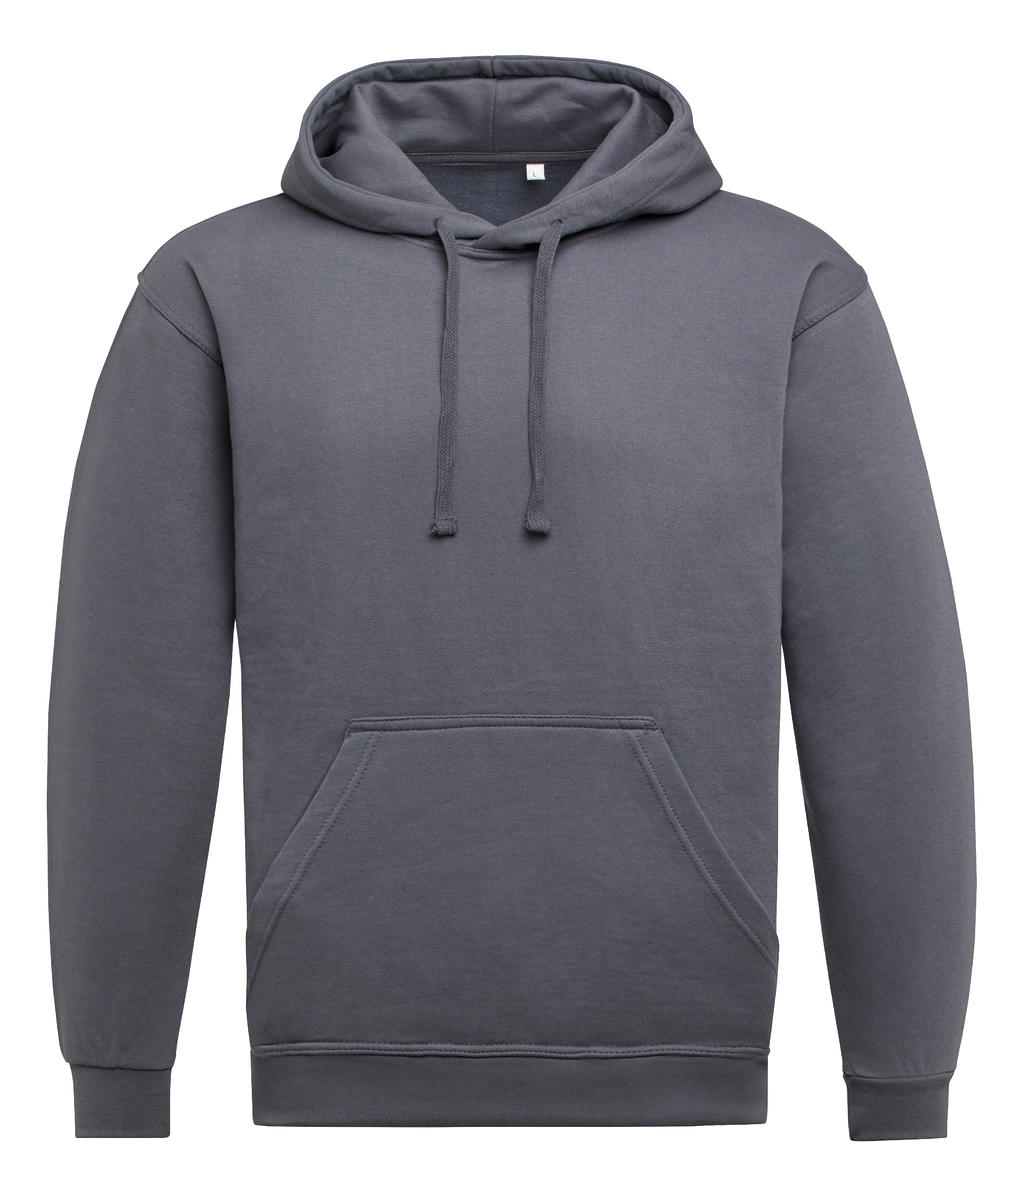 Hoodie en coton et polyester - Chagny